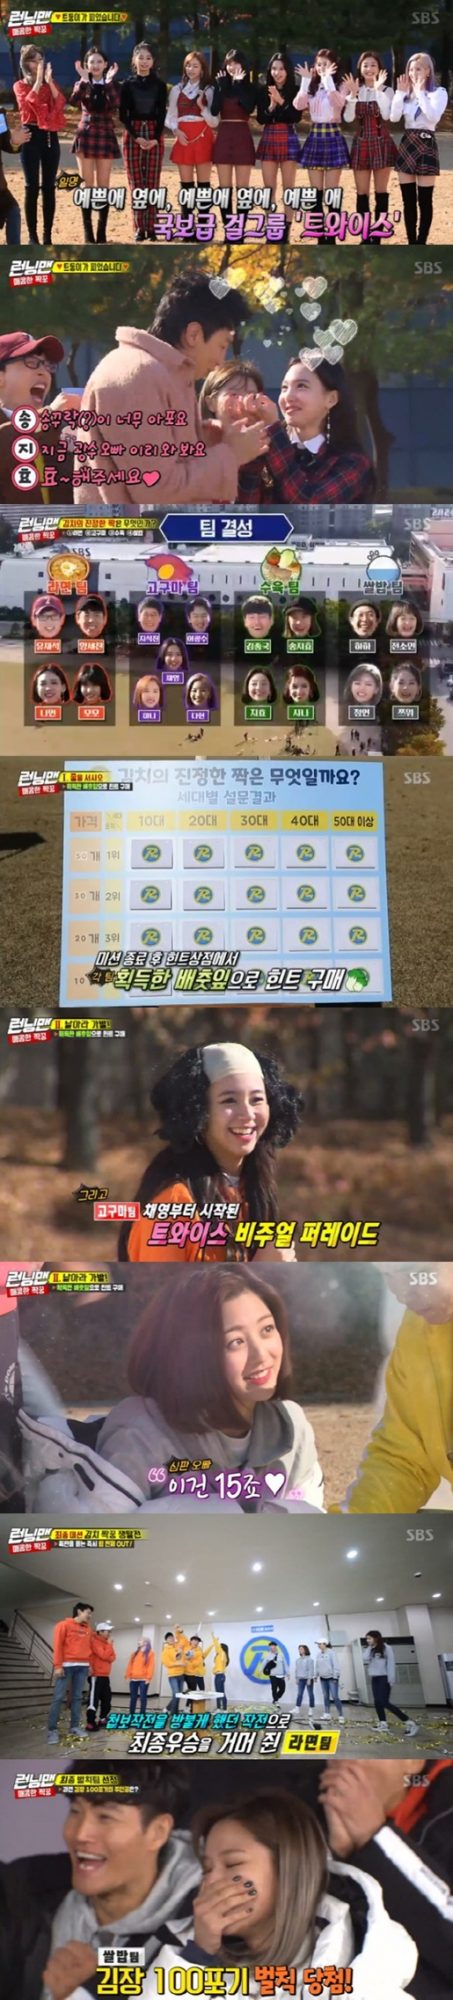 <p>SBS ‘Running Man’this unwavering 2049 target viewership in its time slot # 1.</p><p>Viewership survey Agency Nielsen Korea, according to the last 2 days of the broadcast of ‘Running Man’is the 2049 target audience 4. 5%(NCR, furniture, Part 2 viewership standard)record for the same time period, 1 ranked. Average viewership is part 1 of 5. 3%, Part 2 7. 7%(the NCR furniture viewership standards)was, per minute, with a maximum application rate of 8. Up to 8% jumped.</p><p>The kimchis true mate, find Kim most distinctive ‘spicy paired peek-a-Boo’ lace decorated in the ‘Running Man’ sister group TWICE. This time the race team as the confrontation unfolded. If the team is Yoo Jae-Suk, Yang and more as well, Momo, I smoke, and every team in the Suk Jin, Lee Kwang-soo, Chae, Mina, Implementation, Training, Team Kim Jong Kook, Song JI Hyo,, Hyo, Rice team in that one, small, square, Richardson sub divided into.</p><p>Each team has a ‘line’ through the game fierce confrontation unfolded. If Team, education team, and every team each and 1 win by handing the hint was obtained. Round 2 of the ‘fly! The wig-switching in the potato team and if the team is 1 for, 2 for to or once the hint is acquired.</p><p>The last in the final round of the menu that is attached to the name tag off the opposing team menu and can be exchanged. But the bomb attached to the name tags off team the power is out, and the menu until the opponent beyond. Ago min is Lee Kwang-soos name tag off, but Lee Kwang-soo is a bomb, this Rice team is the power being out face. Water and water our father, and our exchange in La, teams info to start up, expand, and ‘kimchis true even’exclaim the headquarters seat. Can Training, Team support available to the team or the name of the tag off as when I smoke “then”and cry victory.</p><p>Great 100 give Driving Cycle penalty for the uncle in the game Rice team of the square ‘shit son’, born and penalties in the you win. This scene is minutes per Top 8. 8%jump in the ‘best 1 minute’.</p><p>Running Man is every Sunday 4: 50 Minutes broadcast.</p>